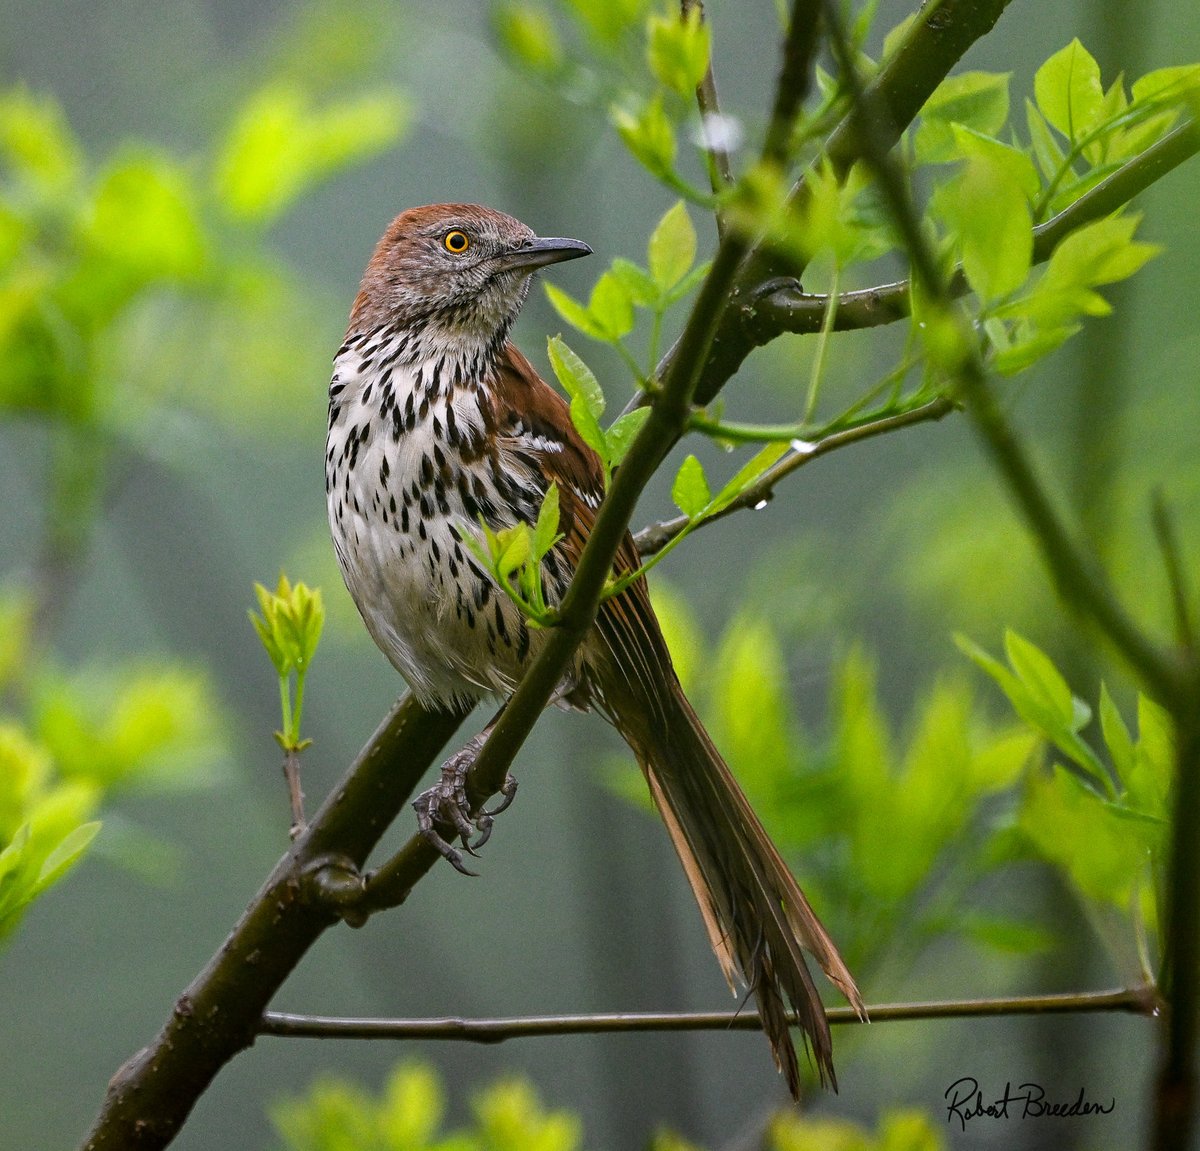 A soggy Brown Thrasher on a rainy morning giving me the eye